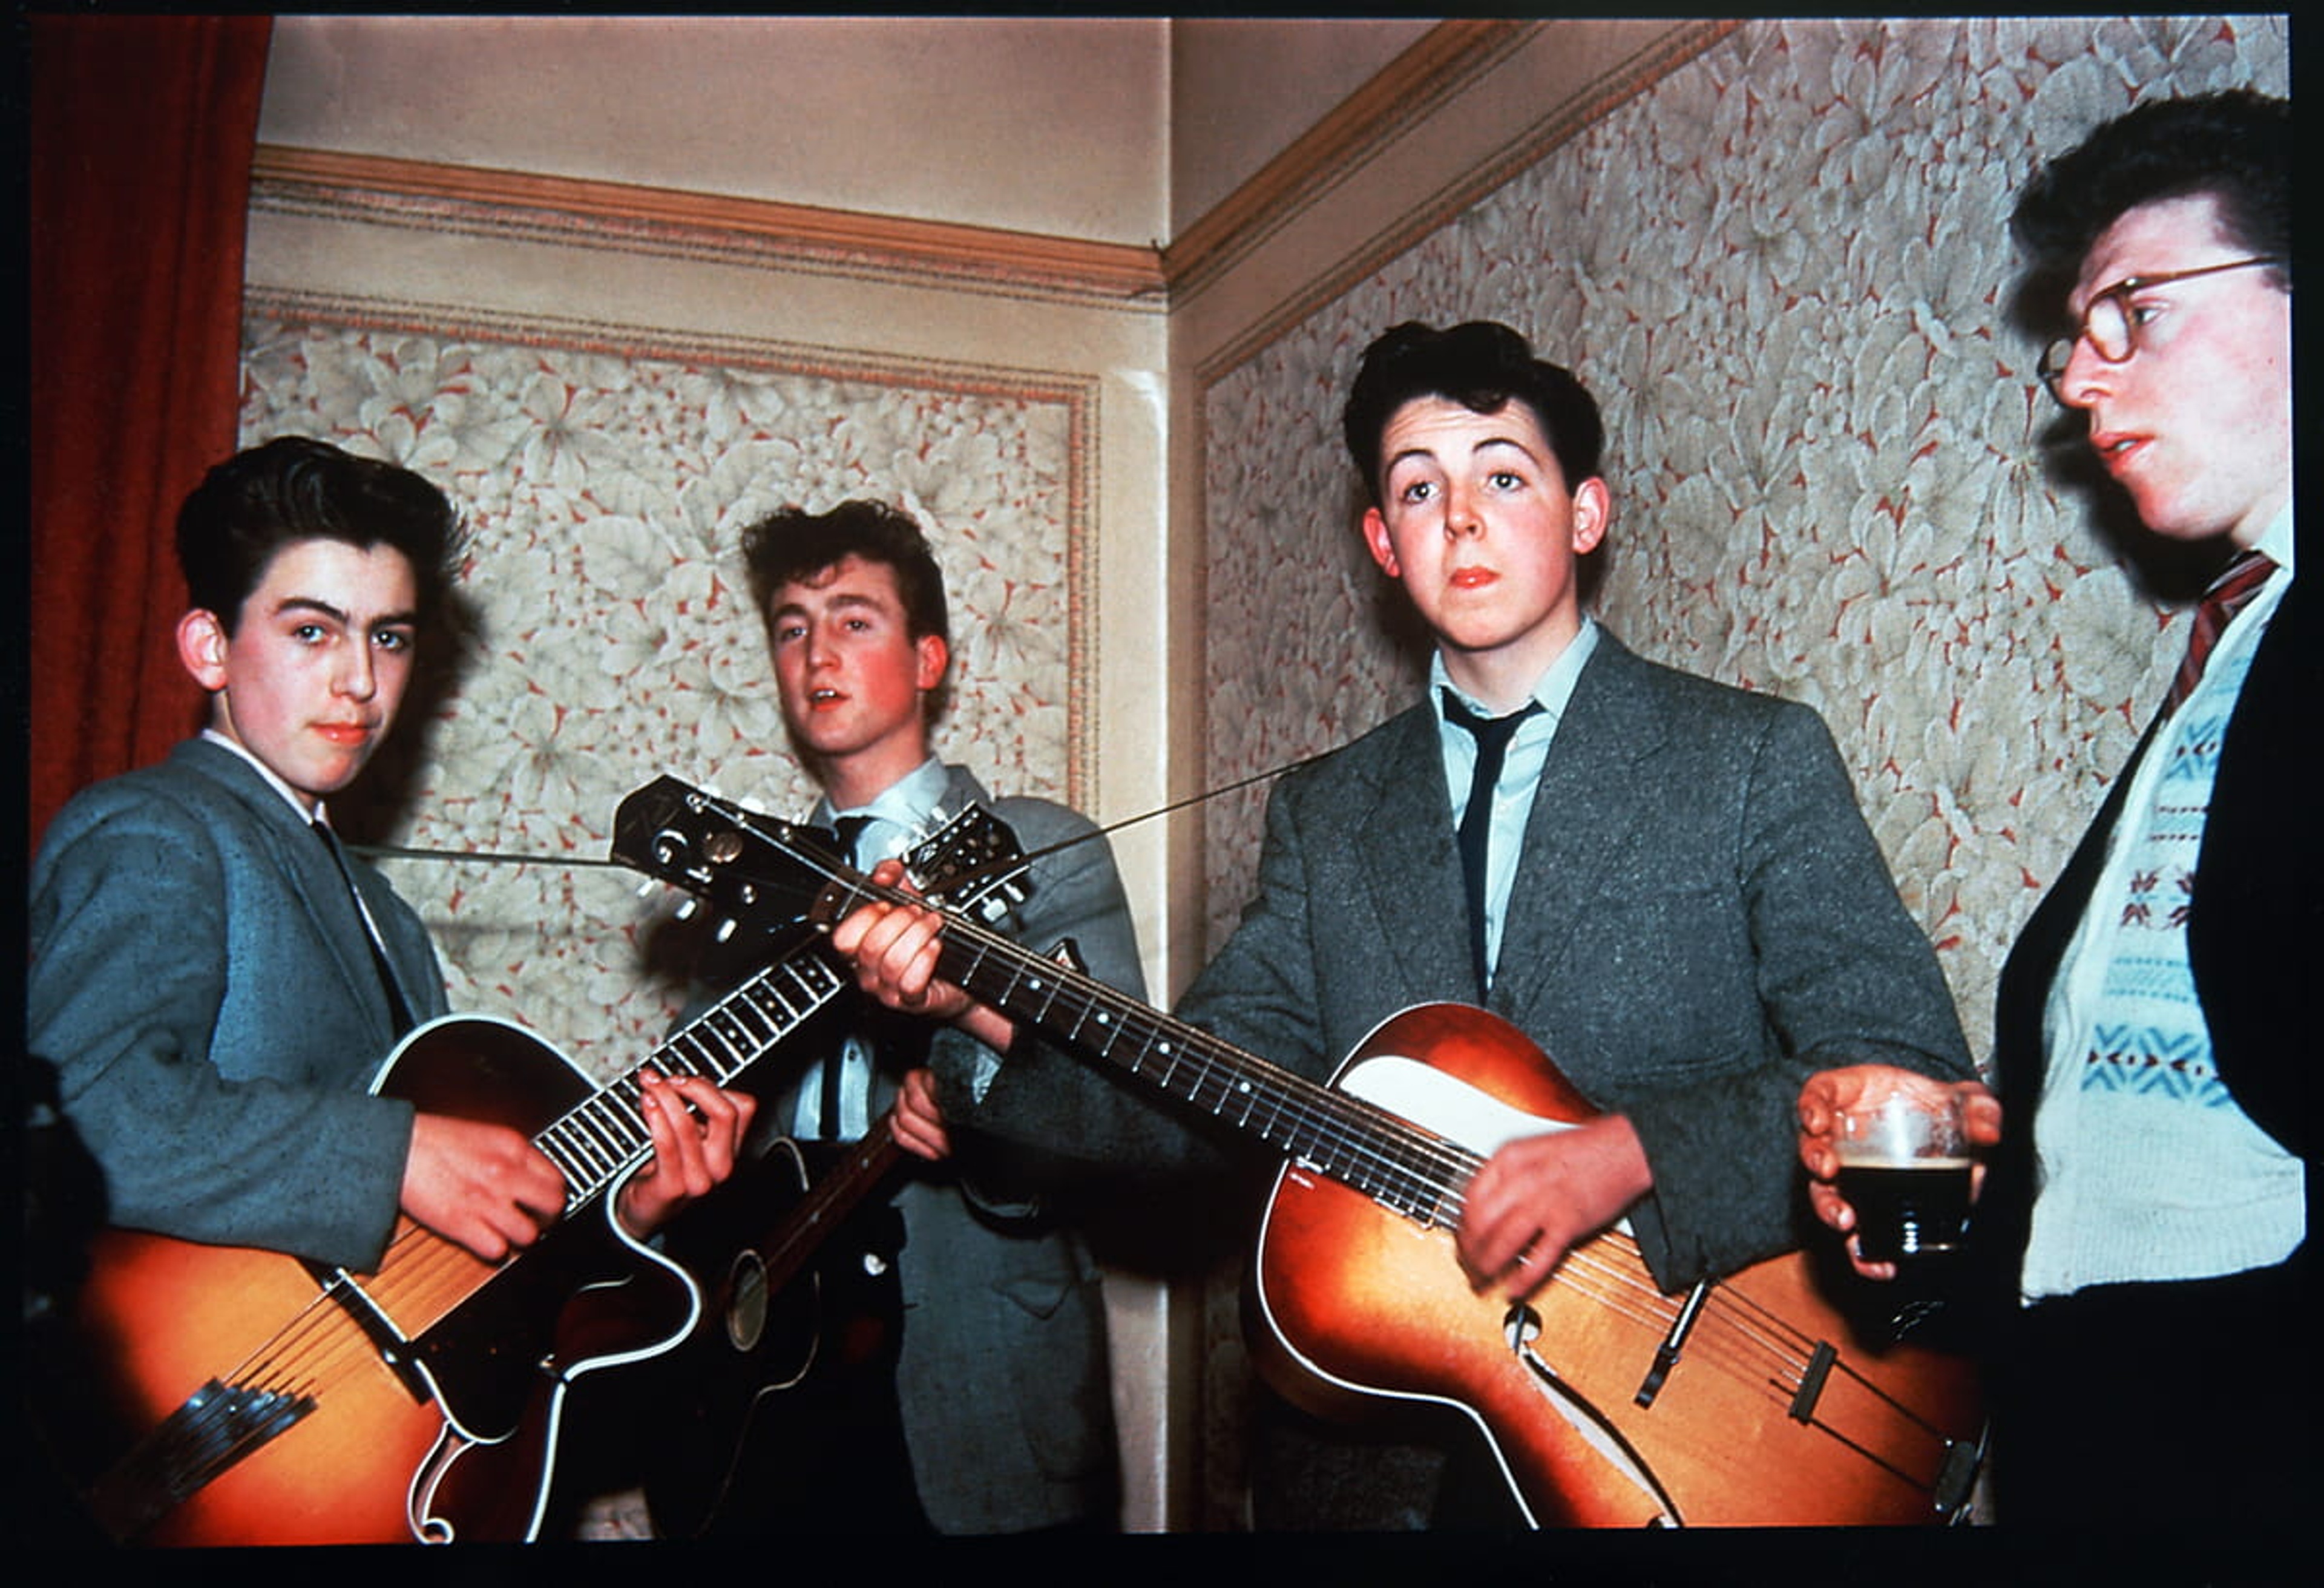 Paul with George Harrison, John Lennon and Dennis Littler in Liverpool, 1958. Photo by Mike McCartney